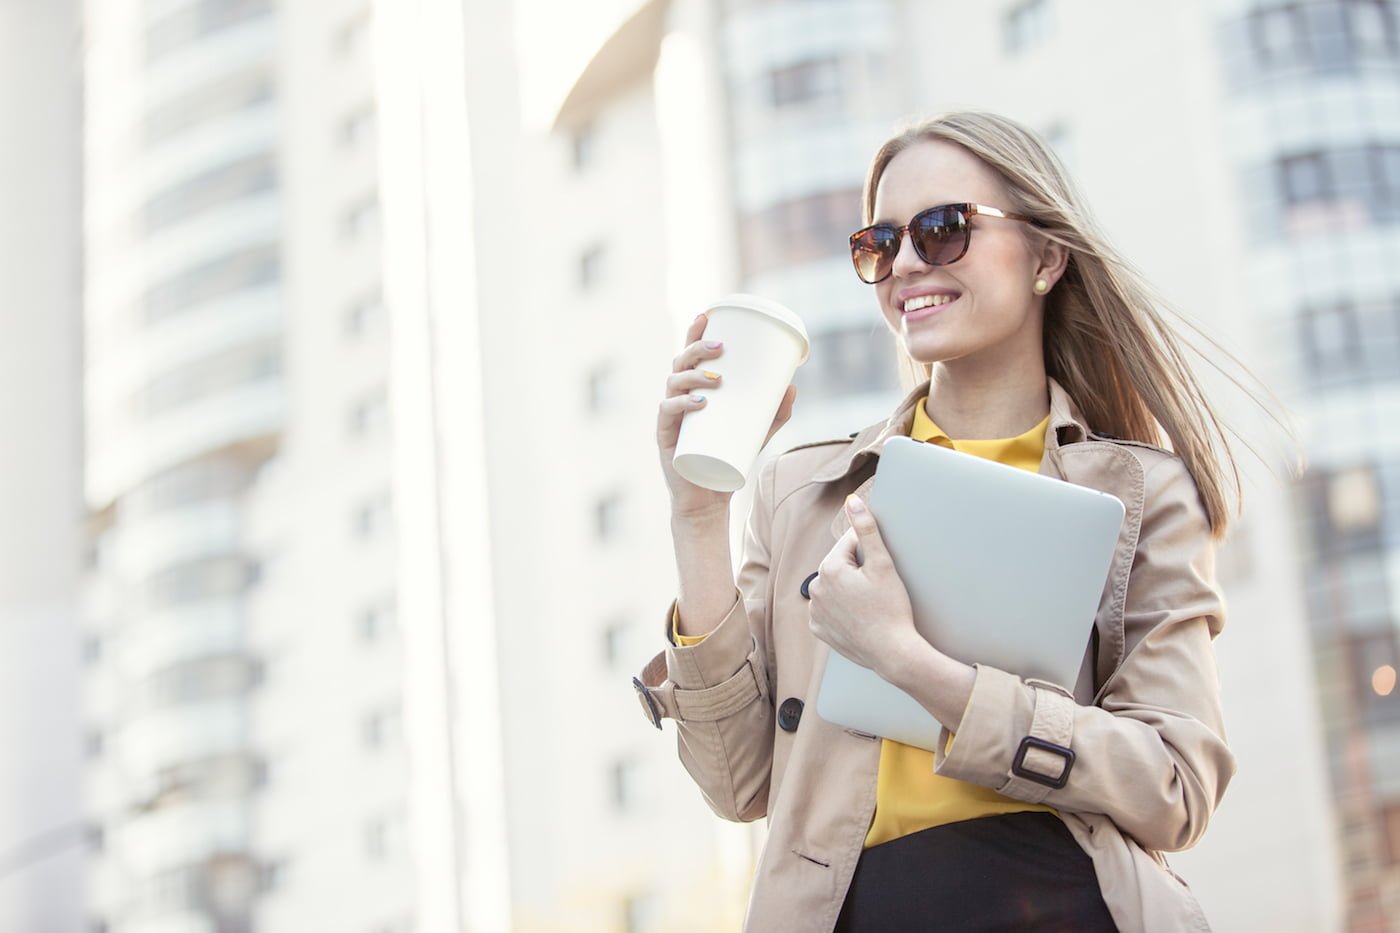 Beautiful young businesswoman with a disposable coffee cup, drinking coffee, and holding tablet in her hands against urban city background.